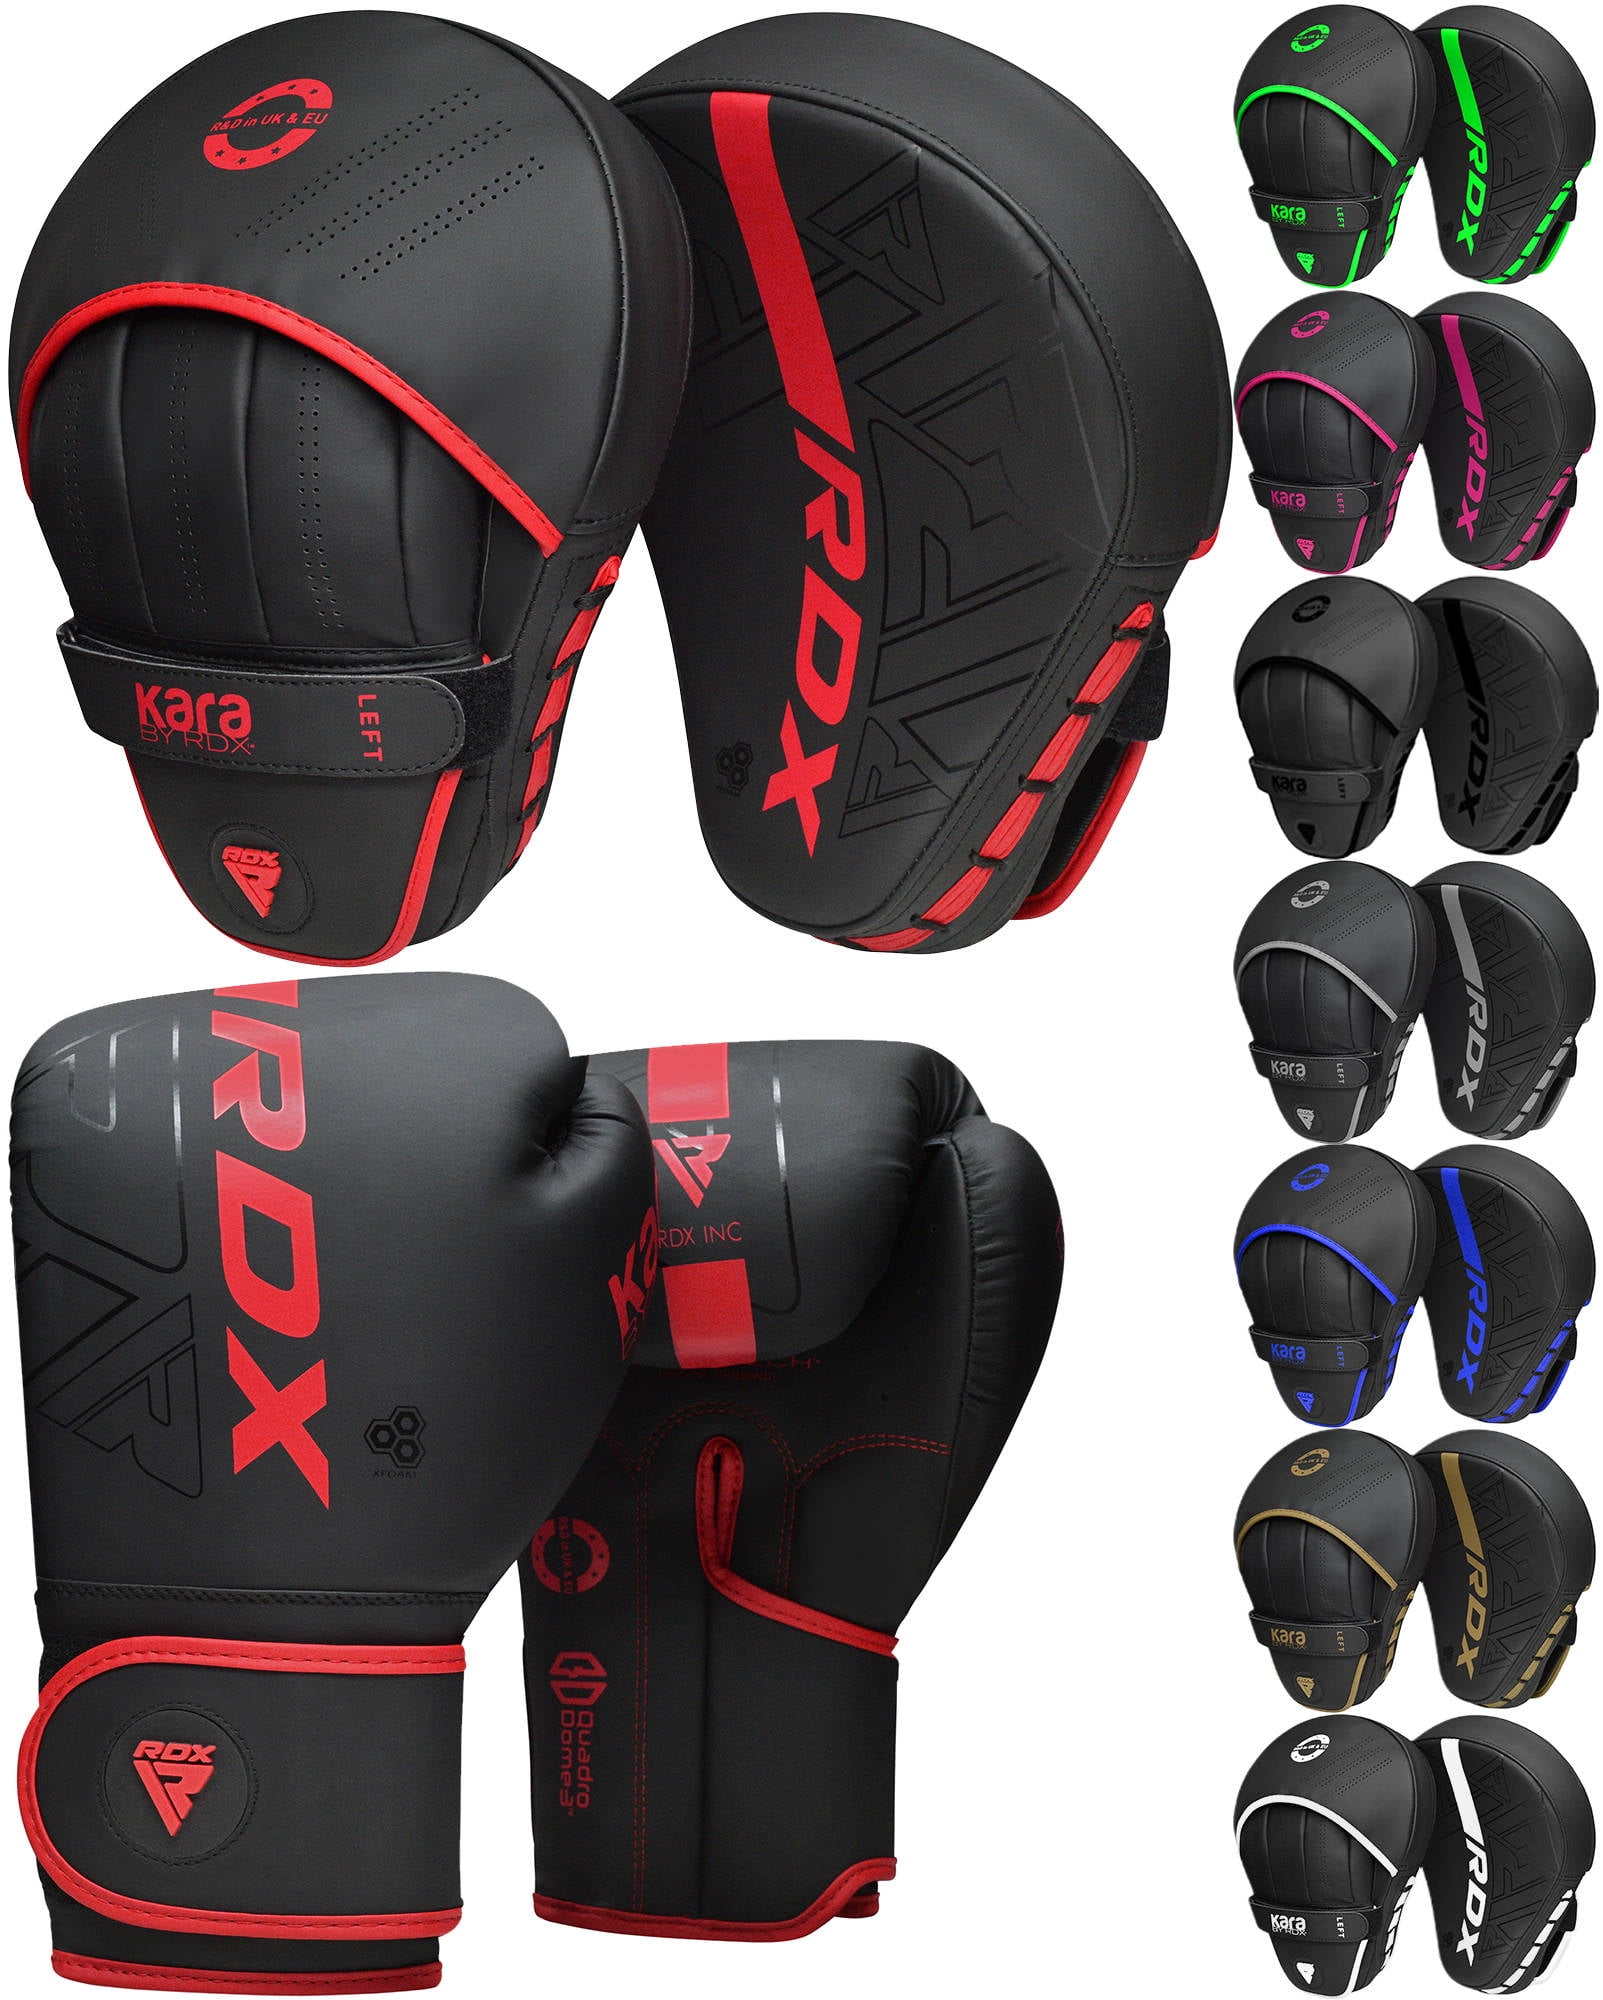 Boxing Focus Pads Hook and Jab Kick Boxing Gloves MMA Pads CURVED 